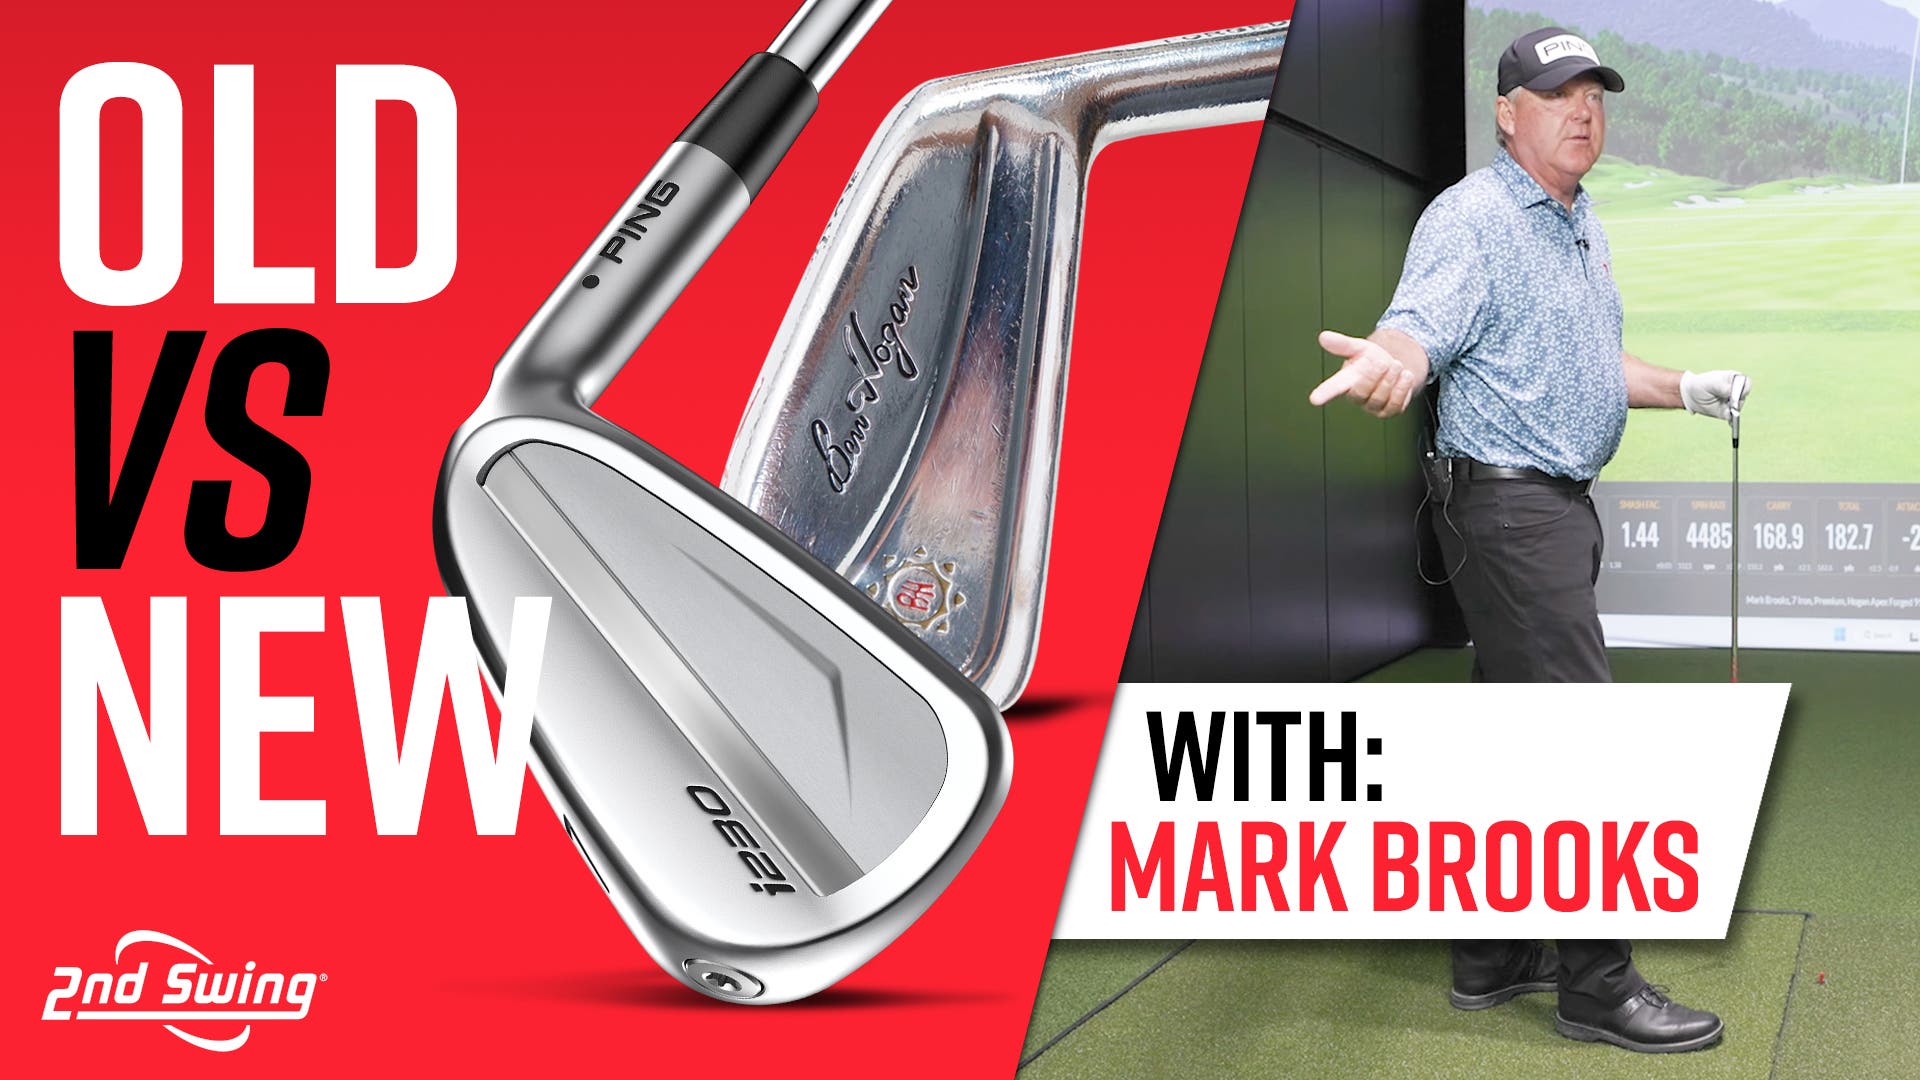 OLD vs NEW Iron Testing with Mark Brooks